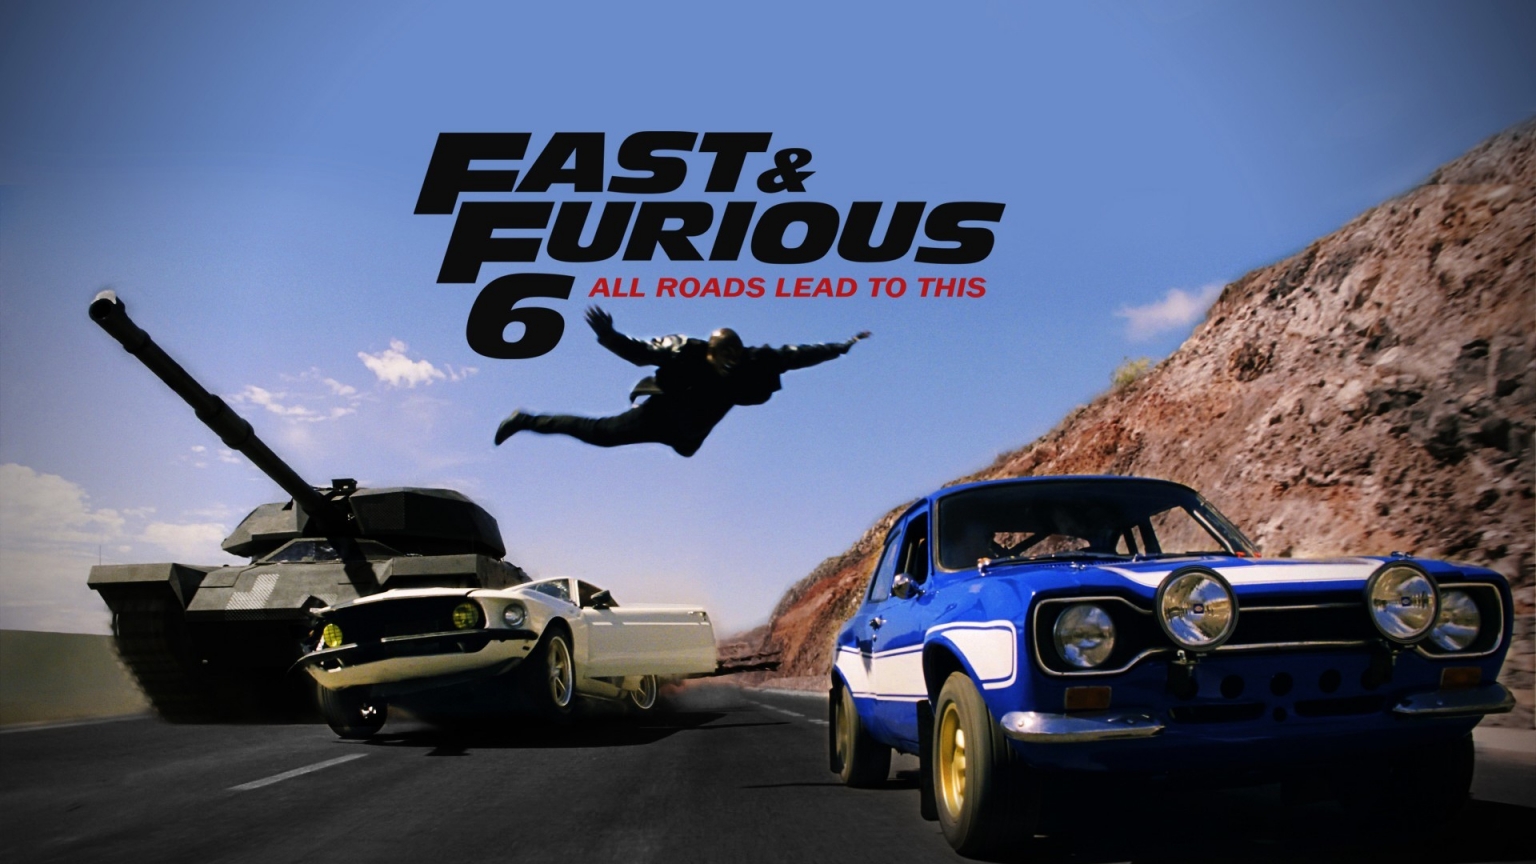 The Fast and Furious 6 for 1536 x 864 HDTV resolution